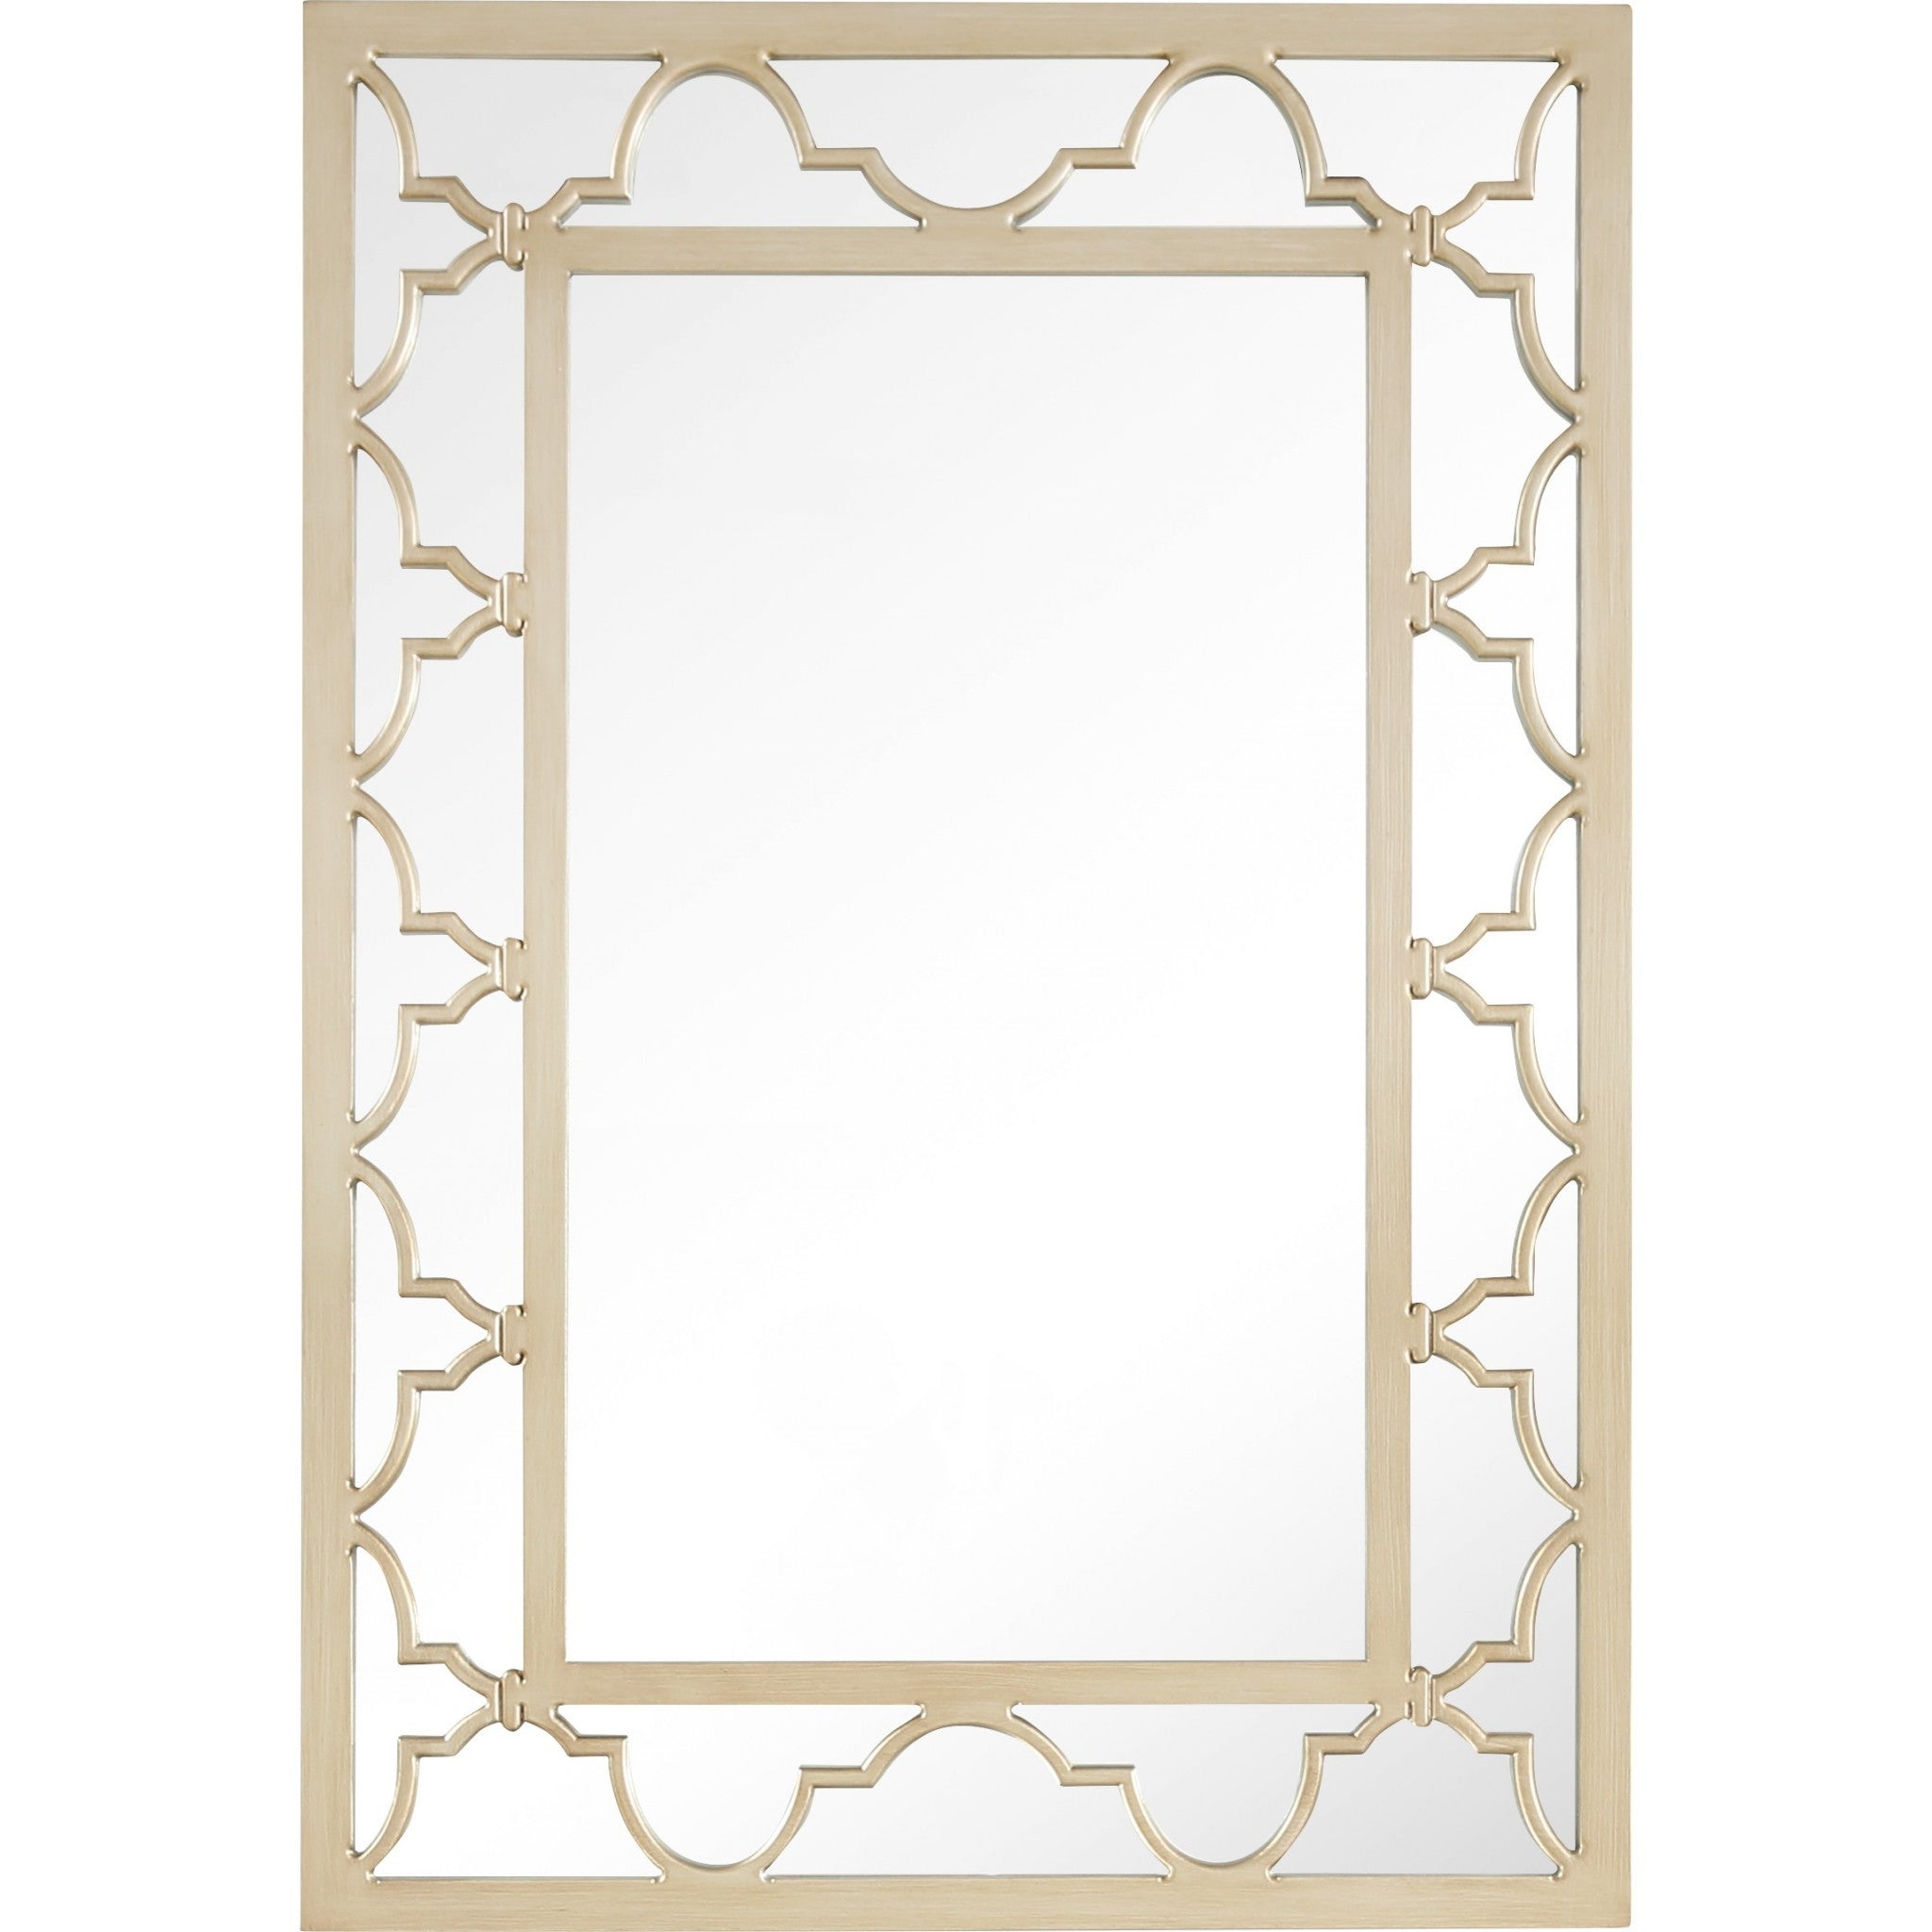 44" Rustic Rectangle Accent Mirror Wall Mounted With Metal Frame